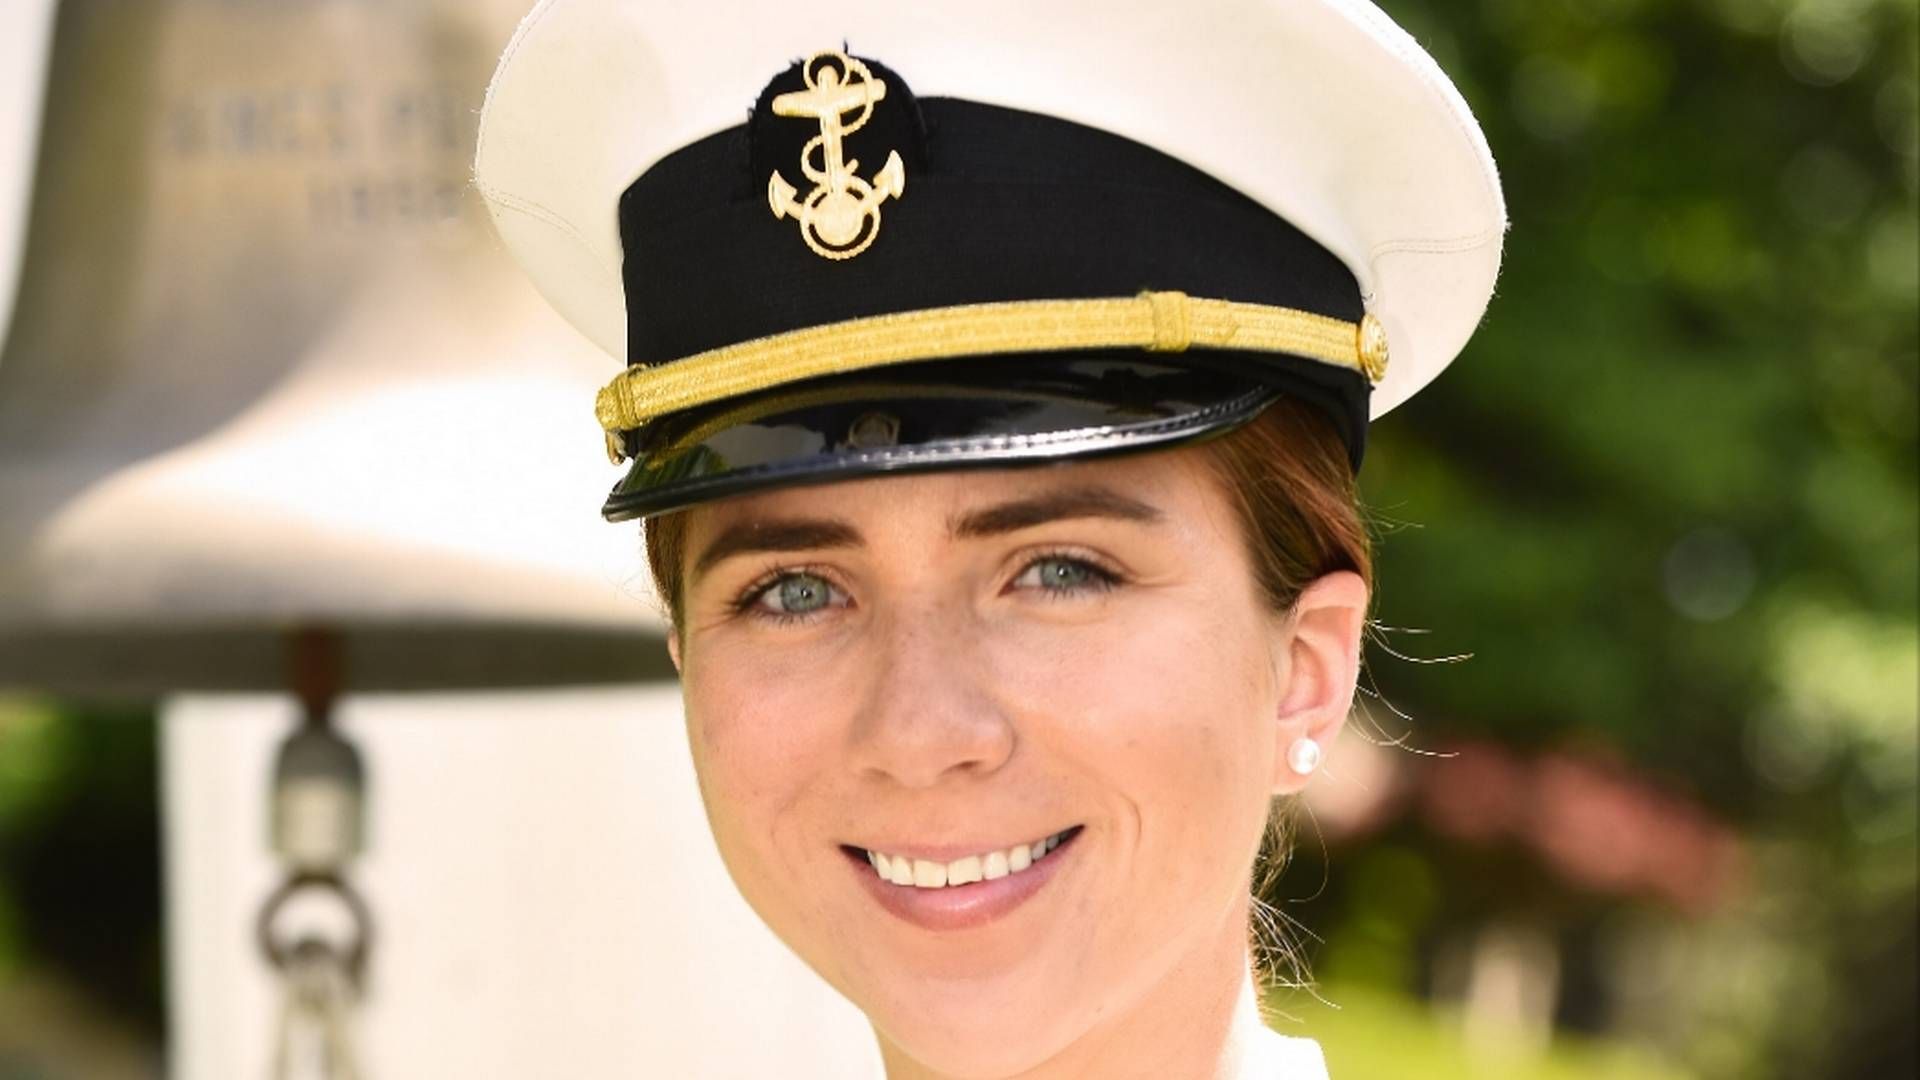 Former naval cadet from Alliance Fairfax tells ShippingWatch that "Gaylan’s allegations about me contained in his lawsuit are disgusting, obviously self-serving, and completely false." | Photo: Maritime Legal Solutions